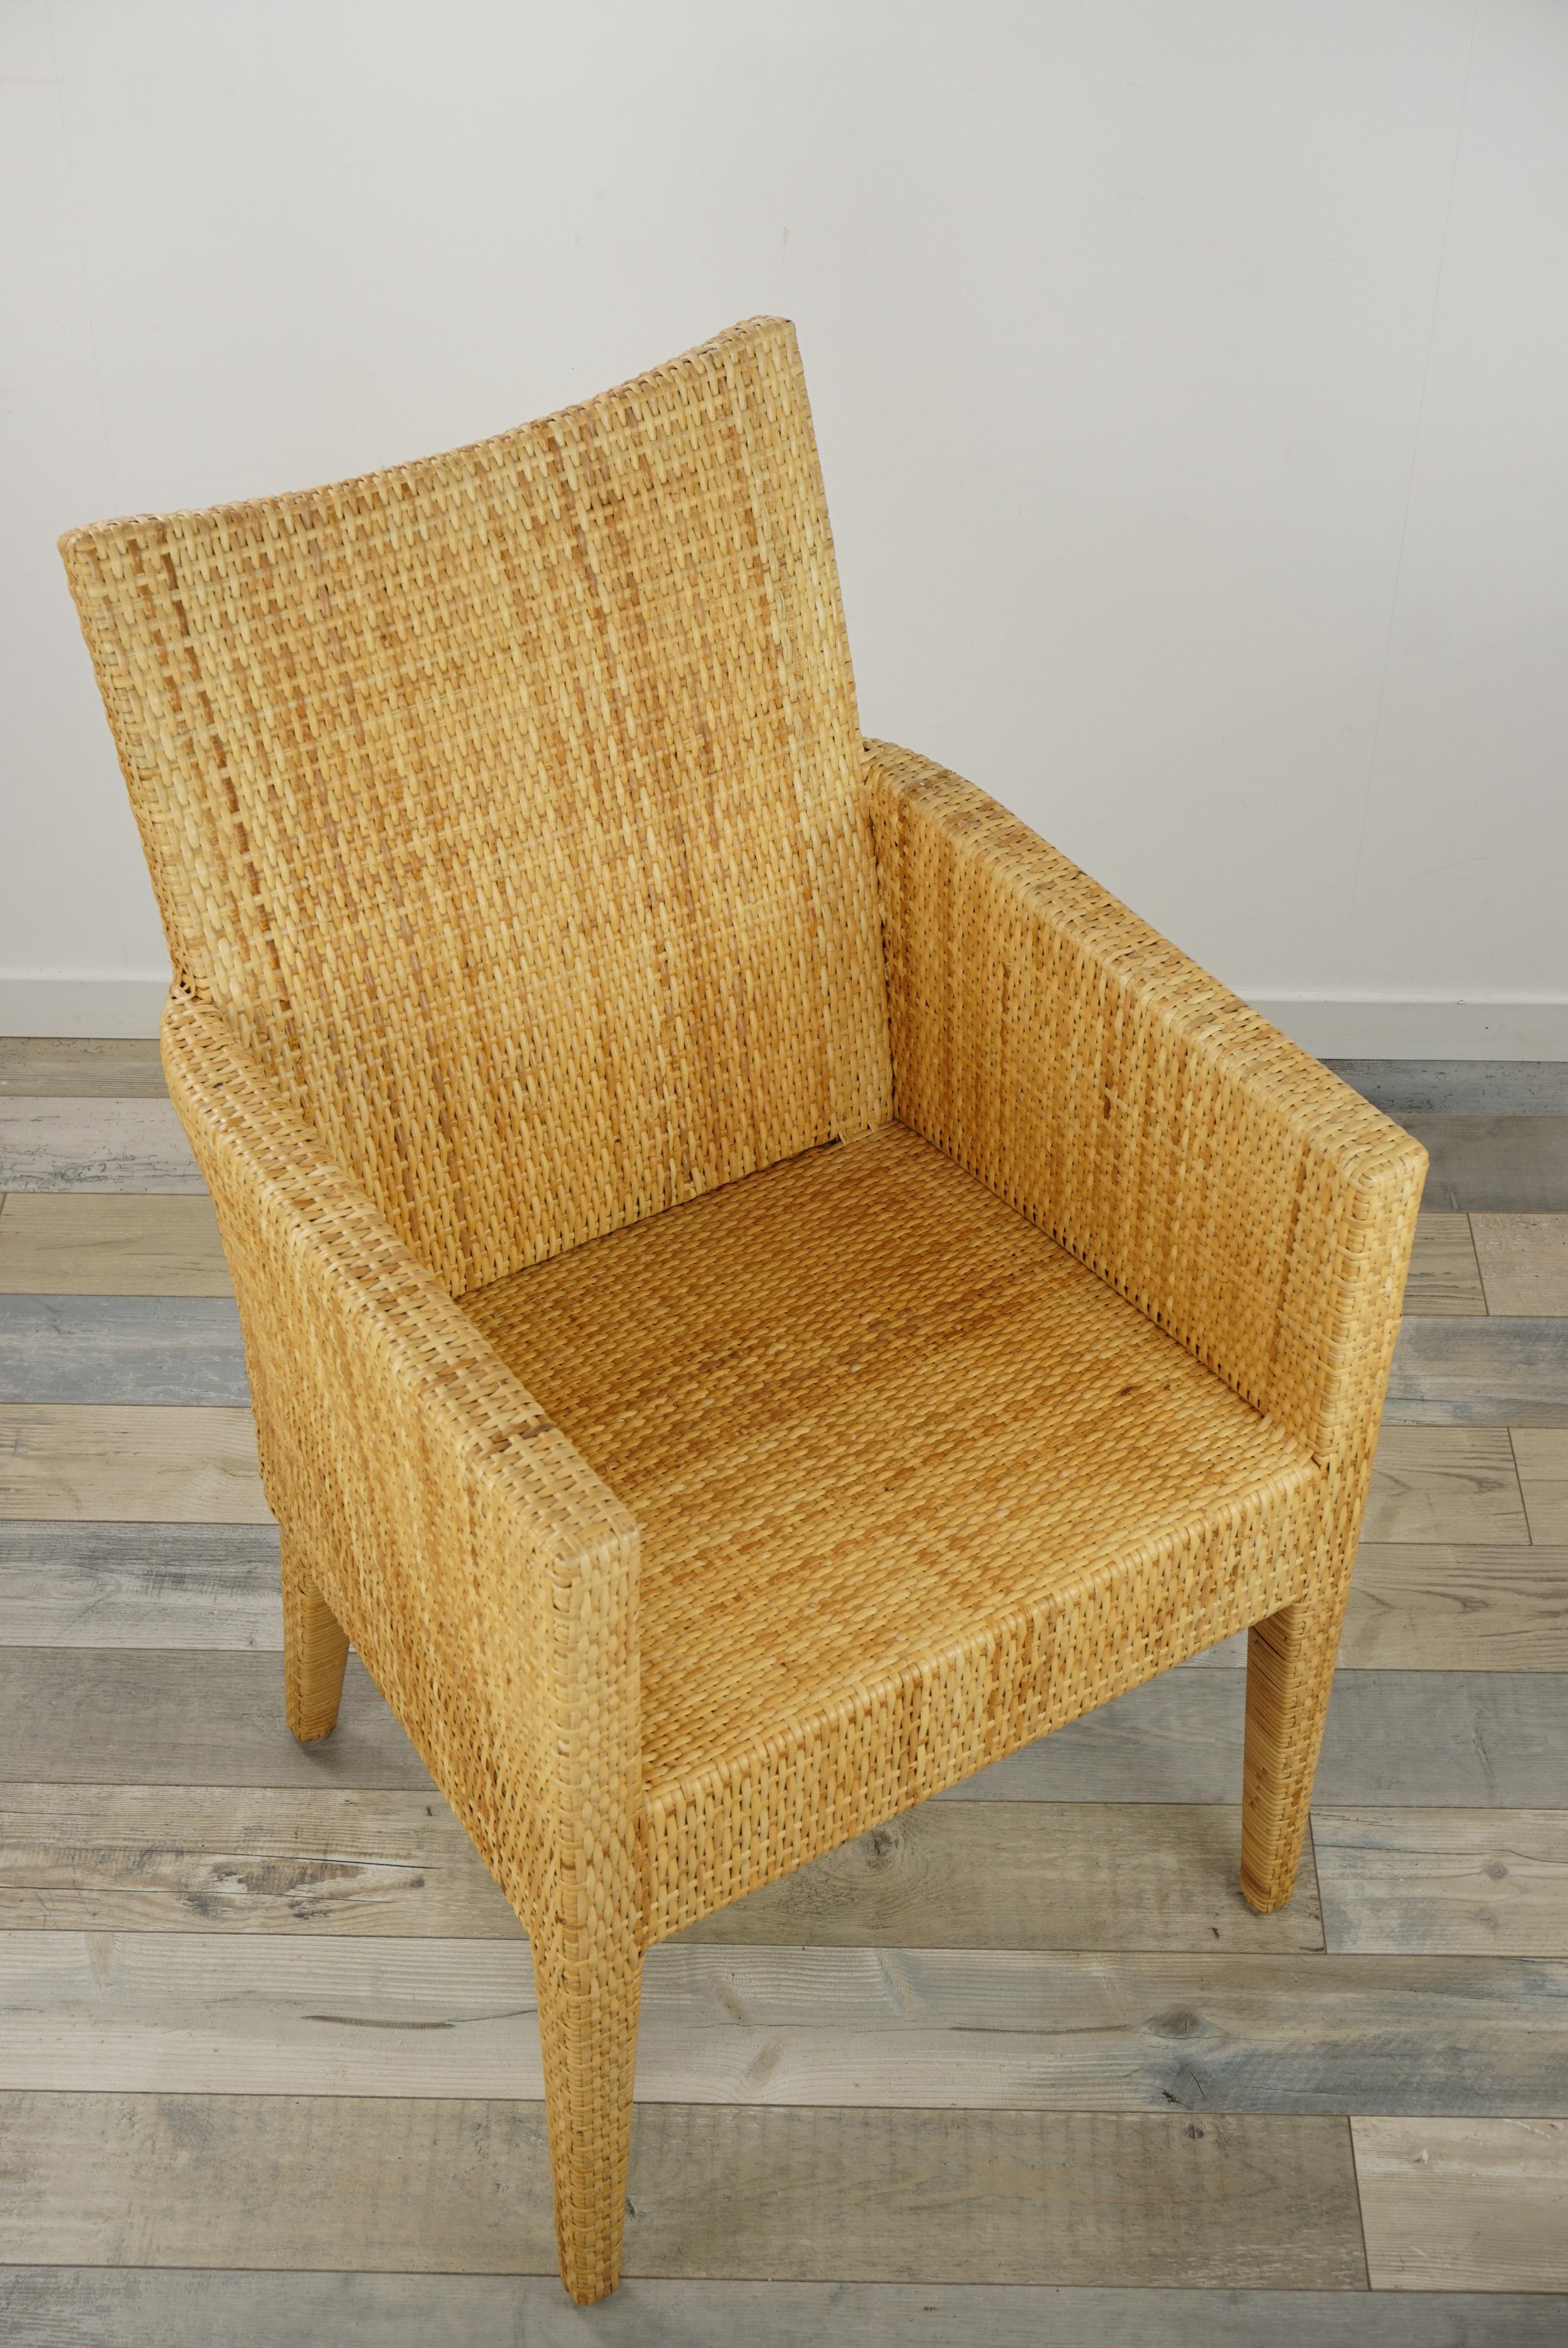 Sculptural bridge armchair rattan with a structure in solid wood covered with a braiding of natural rattan blade.